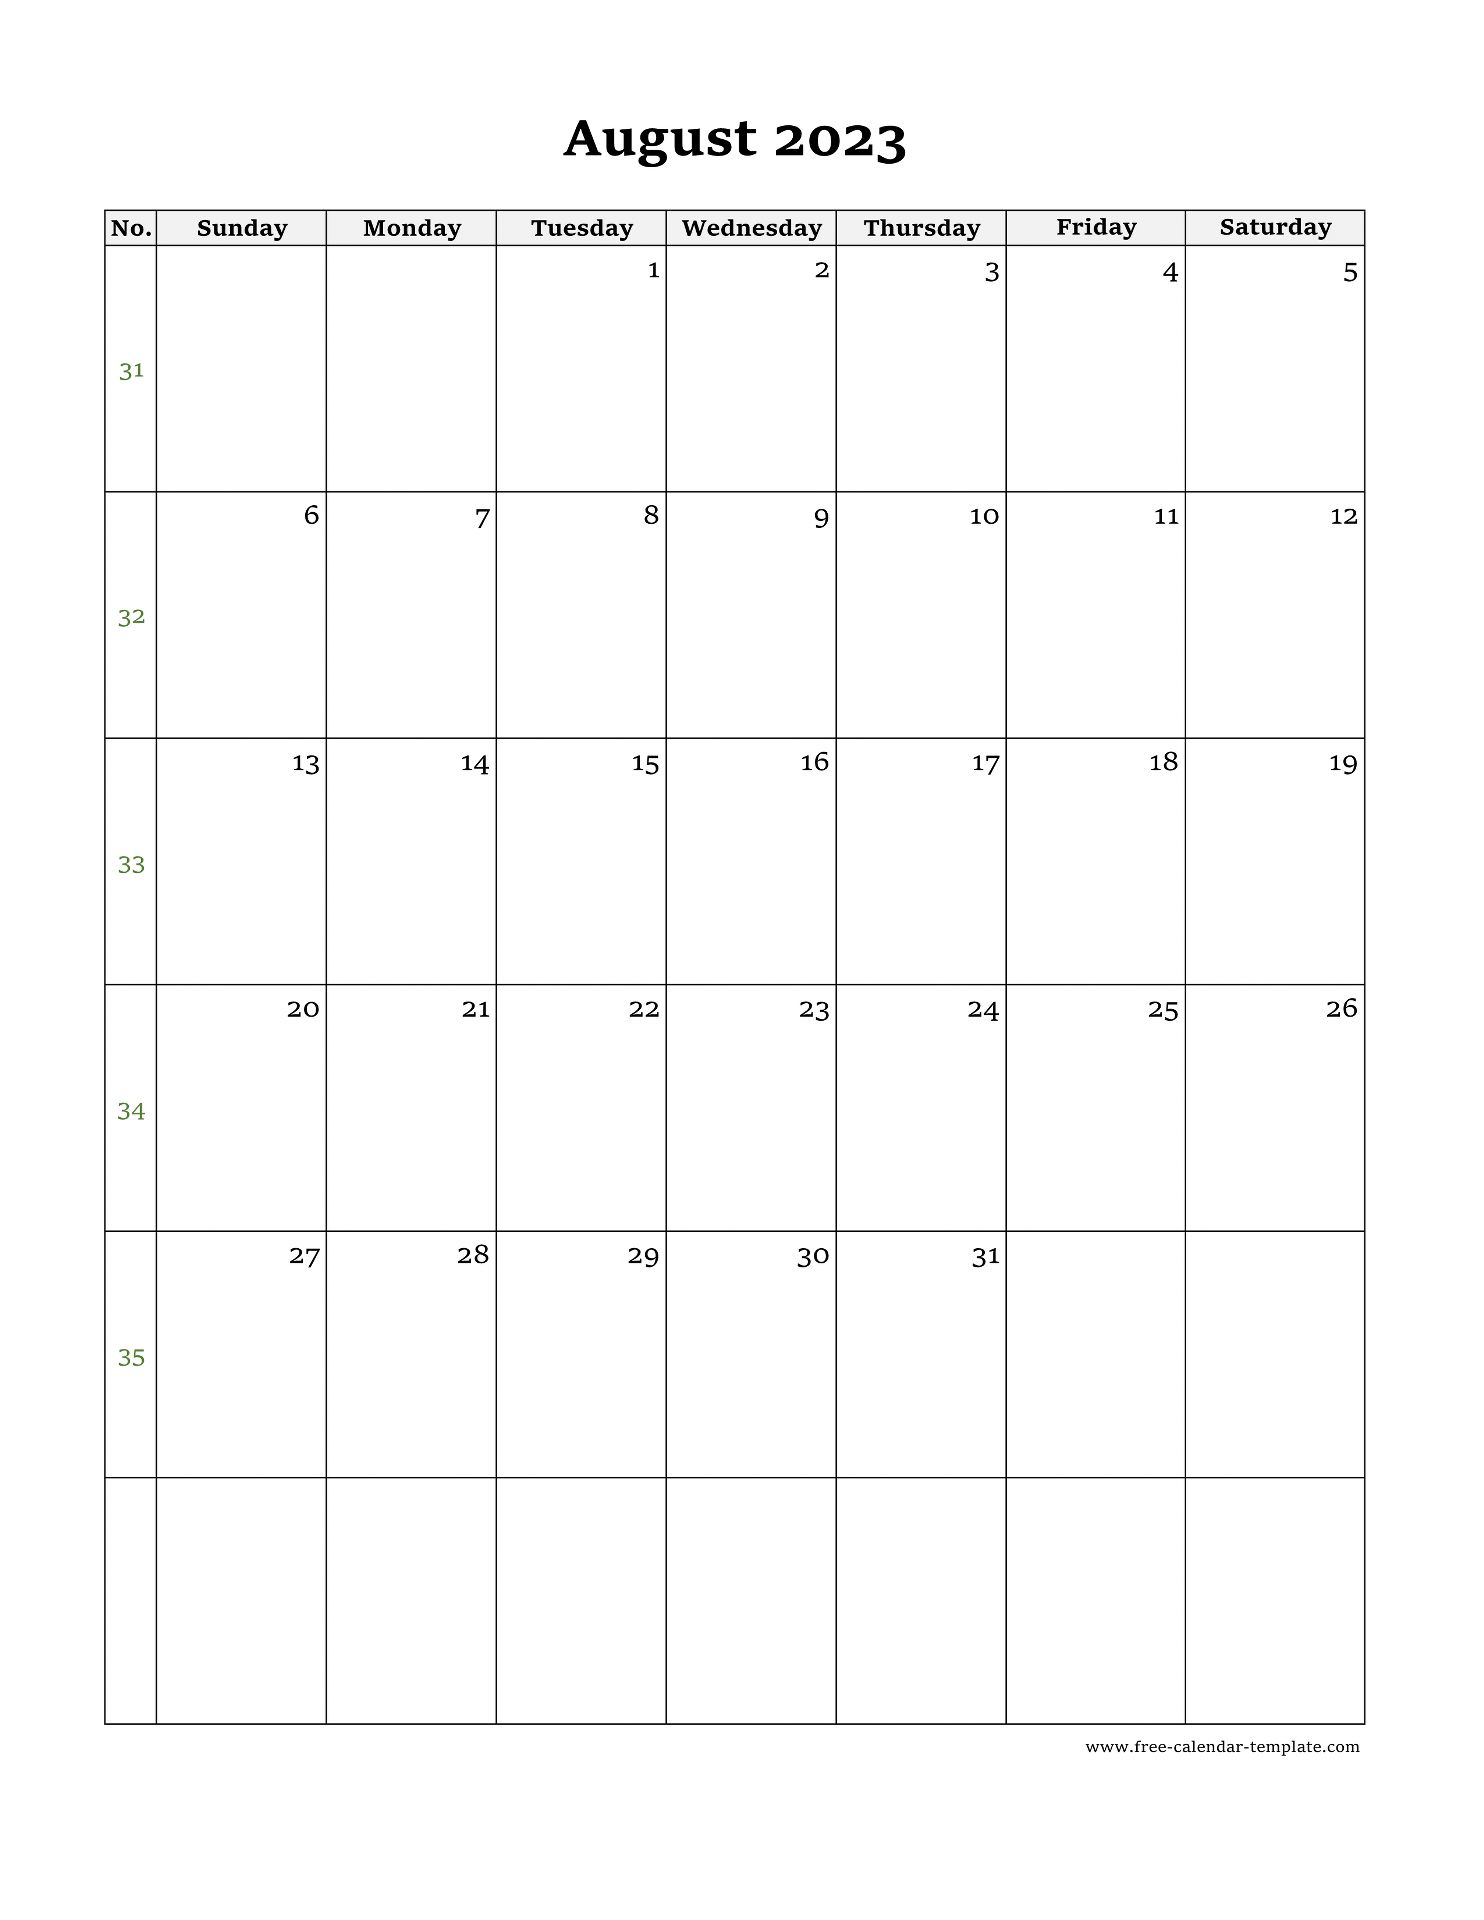 august-calendar-2023-simple-design-with-large-box-on-each-day-for-notes